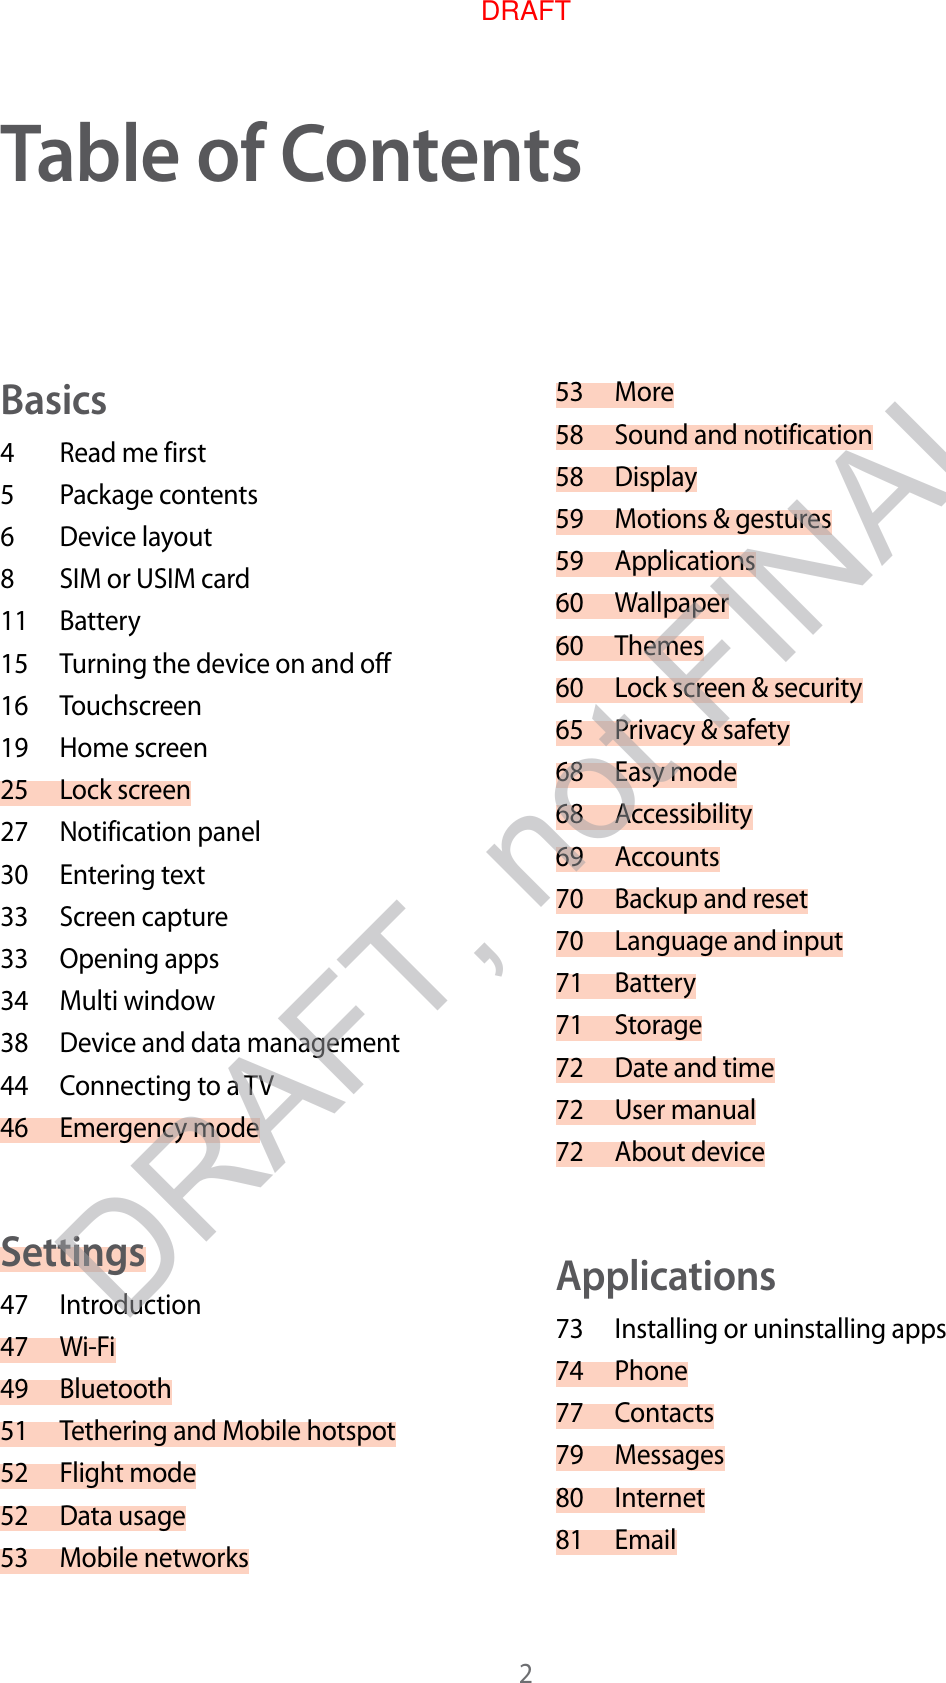 2Table of C on t entsBasics4  Read me first5  P ackage conten ts6  Device lay out8  SIM or USIM card11 Battery15 Turning the device on and off16 Touchscreen19 Home screen25 Lock scr een27 Notification panel30 Entering text33 Screen capture33 Opening apps34 Multi window38 Device and data management44 Connecting to a TV46 Emergency modeSettings47 Introduction47 Wi-Fi49 Bluetooth51 Tethering and Mobile hotspot52 Fligh t mode52 Data usage53 Mobile networks53 More58 Sound and notification58 Display59 Motions &amp; gestures59 Applications60 Wallpaper60 Themes60 Lock scr een &amp; security65 Privacy &amp; safety68 Easy mode68 Accessibility69 Accounts70 Backup and reset70 Language and input71 Battery71 Storage72 Date and time72 User manual72 About deviceApplications73 Installing or uninstalling apps74 Phone77 Contacts79 Messages80 Internet81 EmailDRAFT, not FINALDRAFT